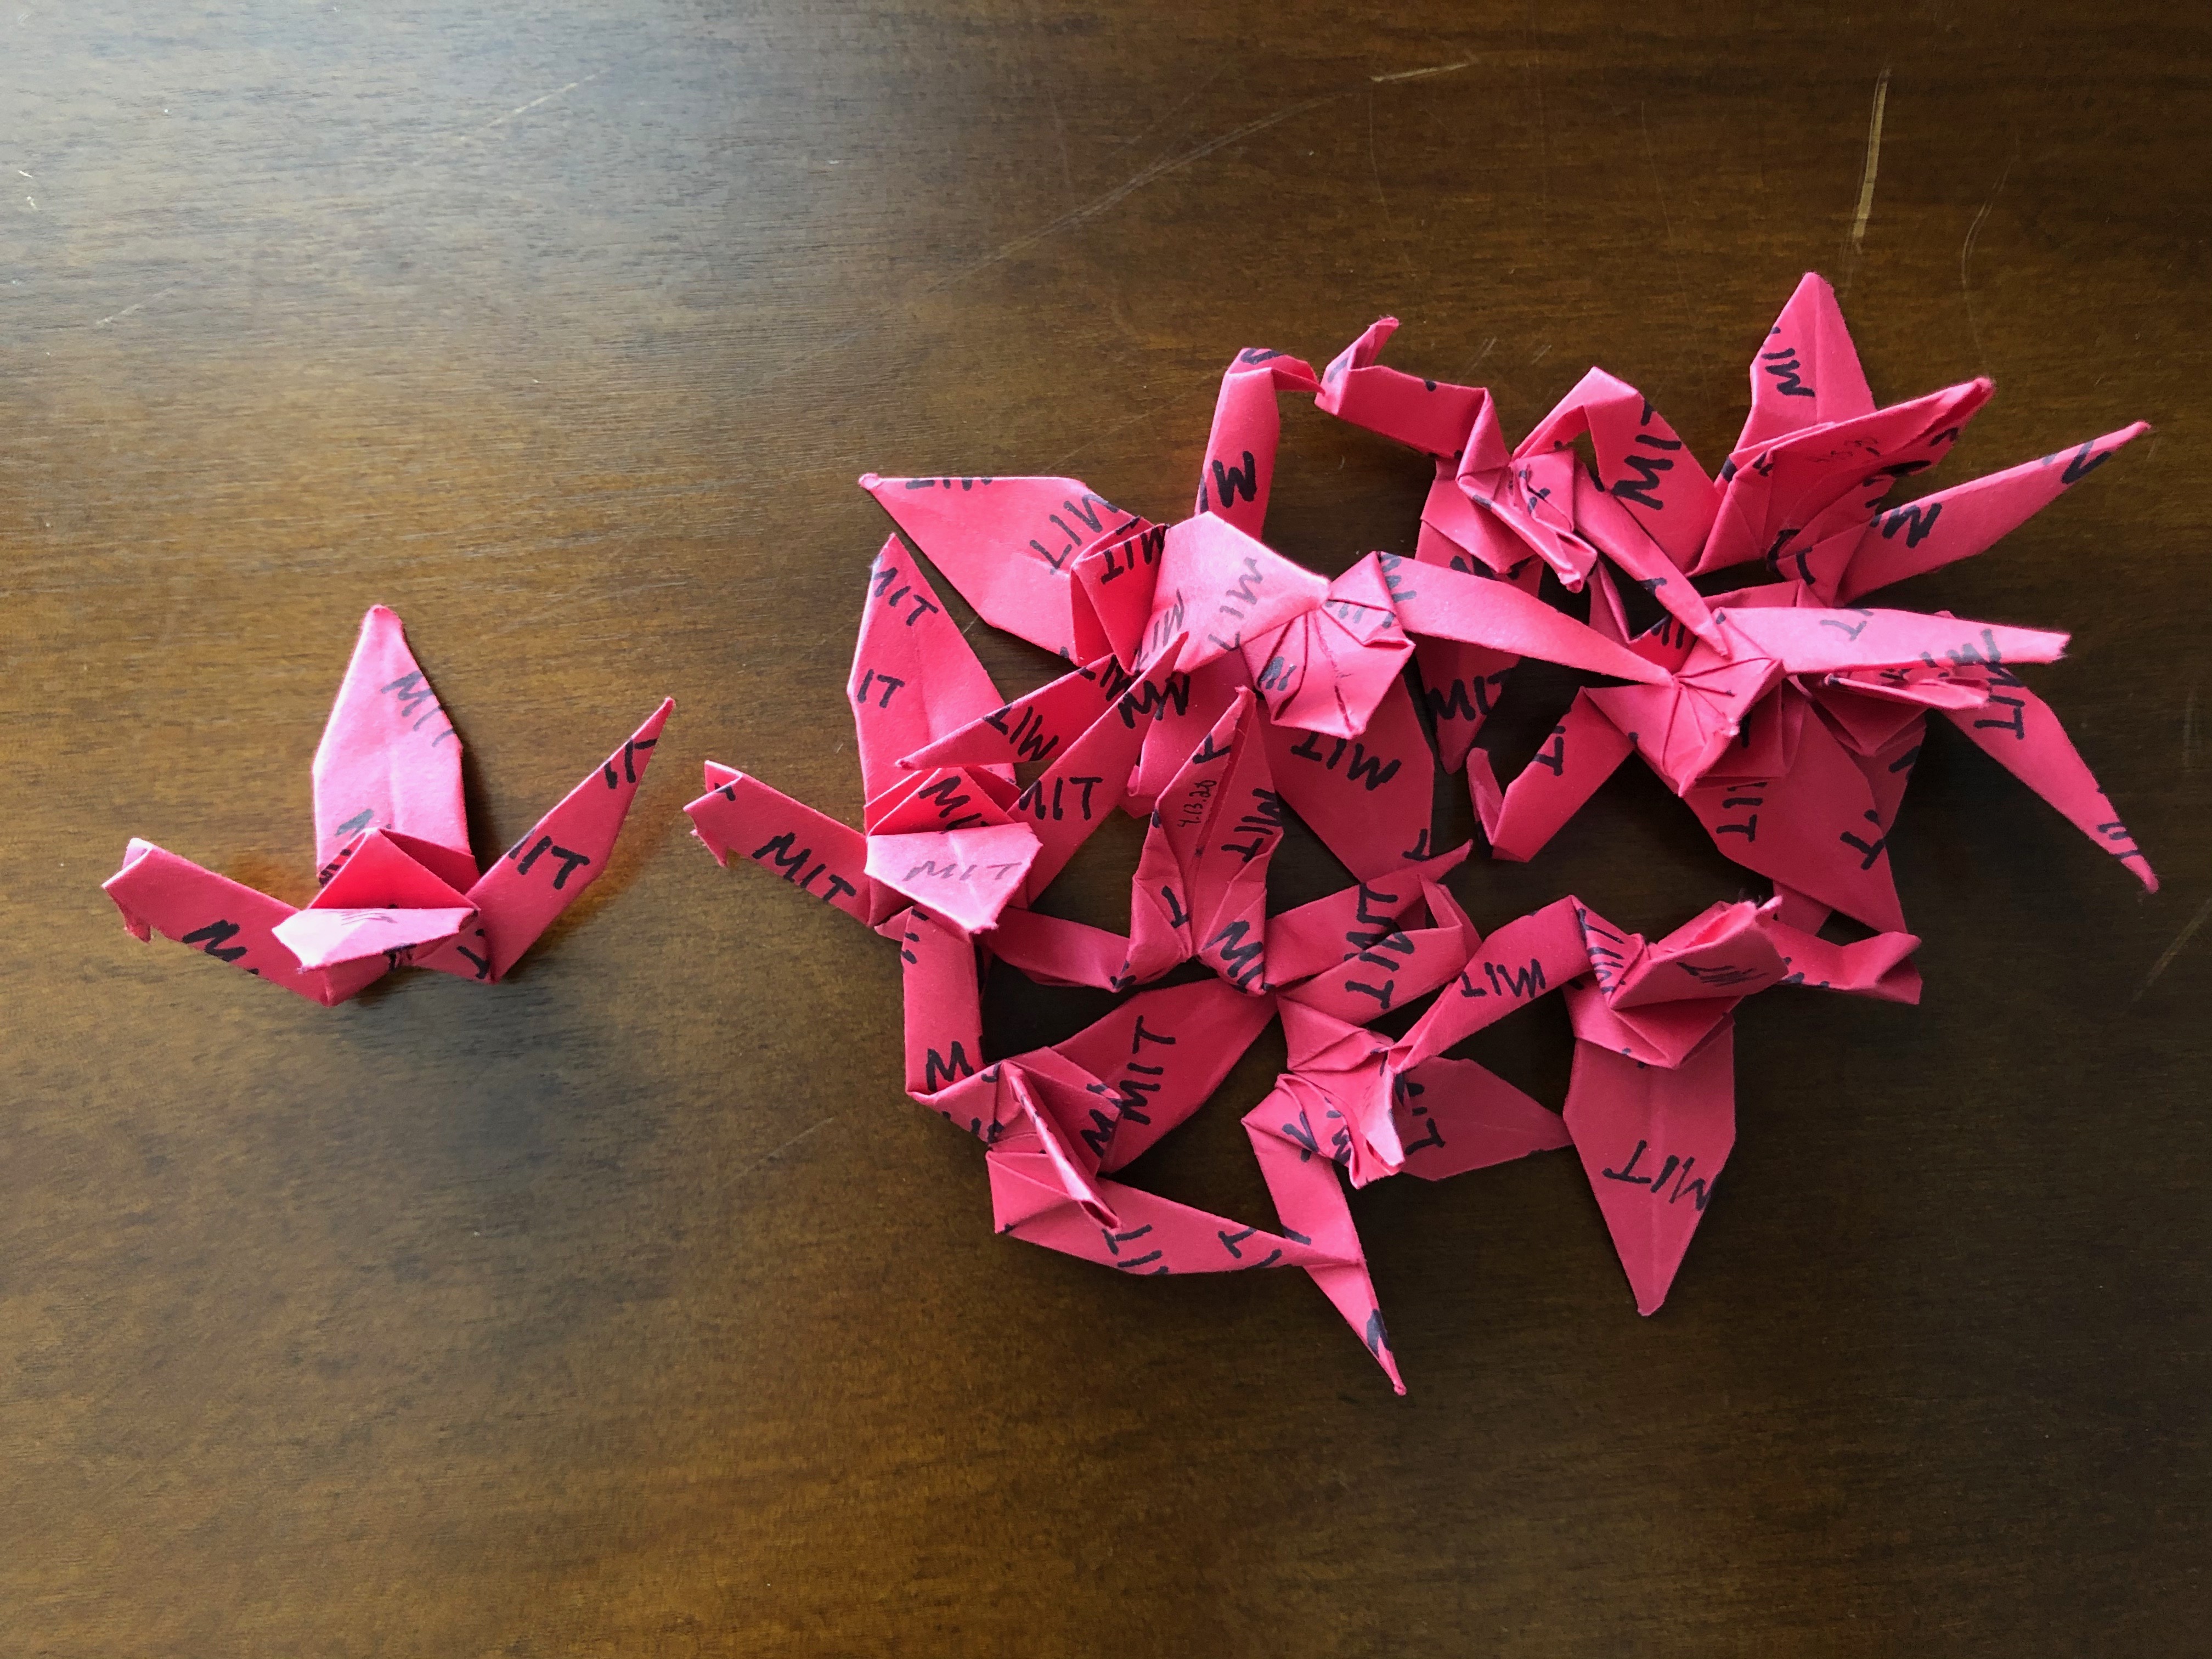 red/pink origami cranes